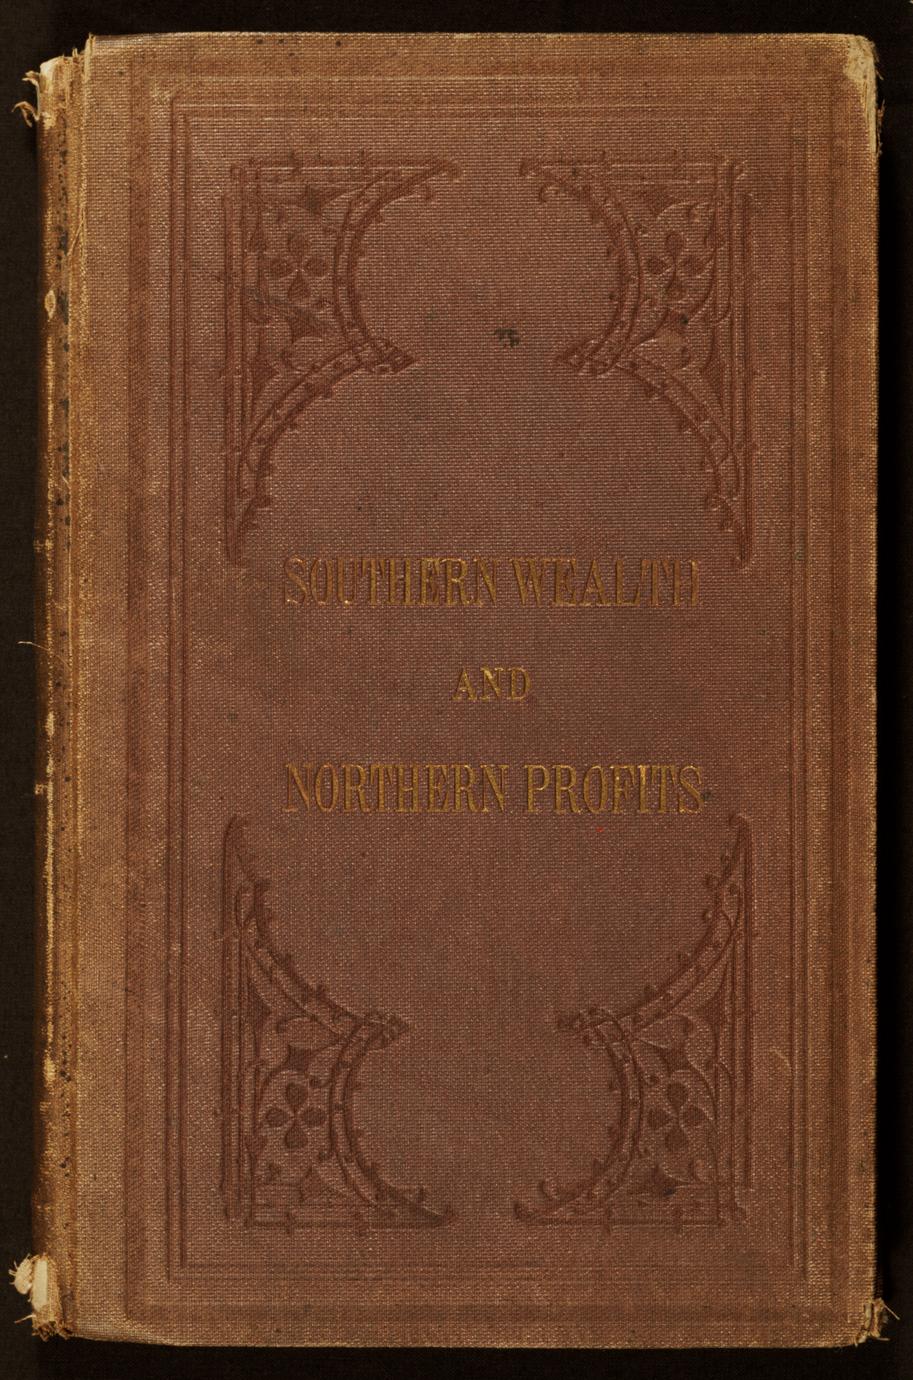 Southern wealth and northern profits, as exhibited in statistical facts and official figures : showing the necessity of union to the future prosperity and welfare of the Republic (1 of 3)